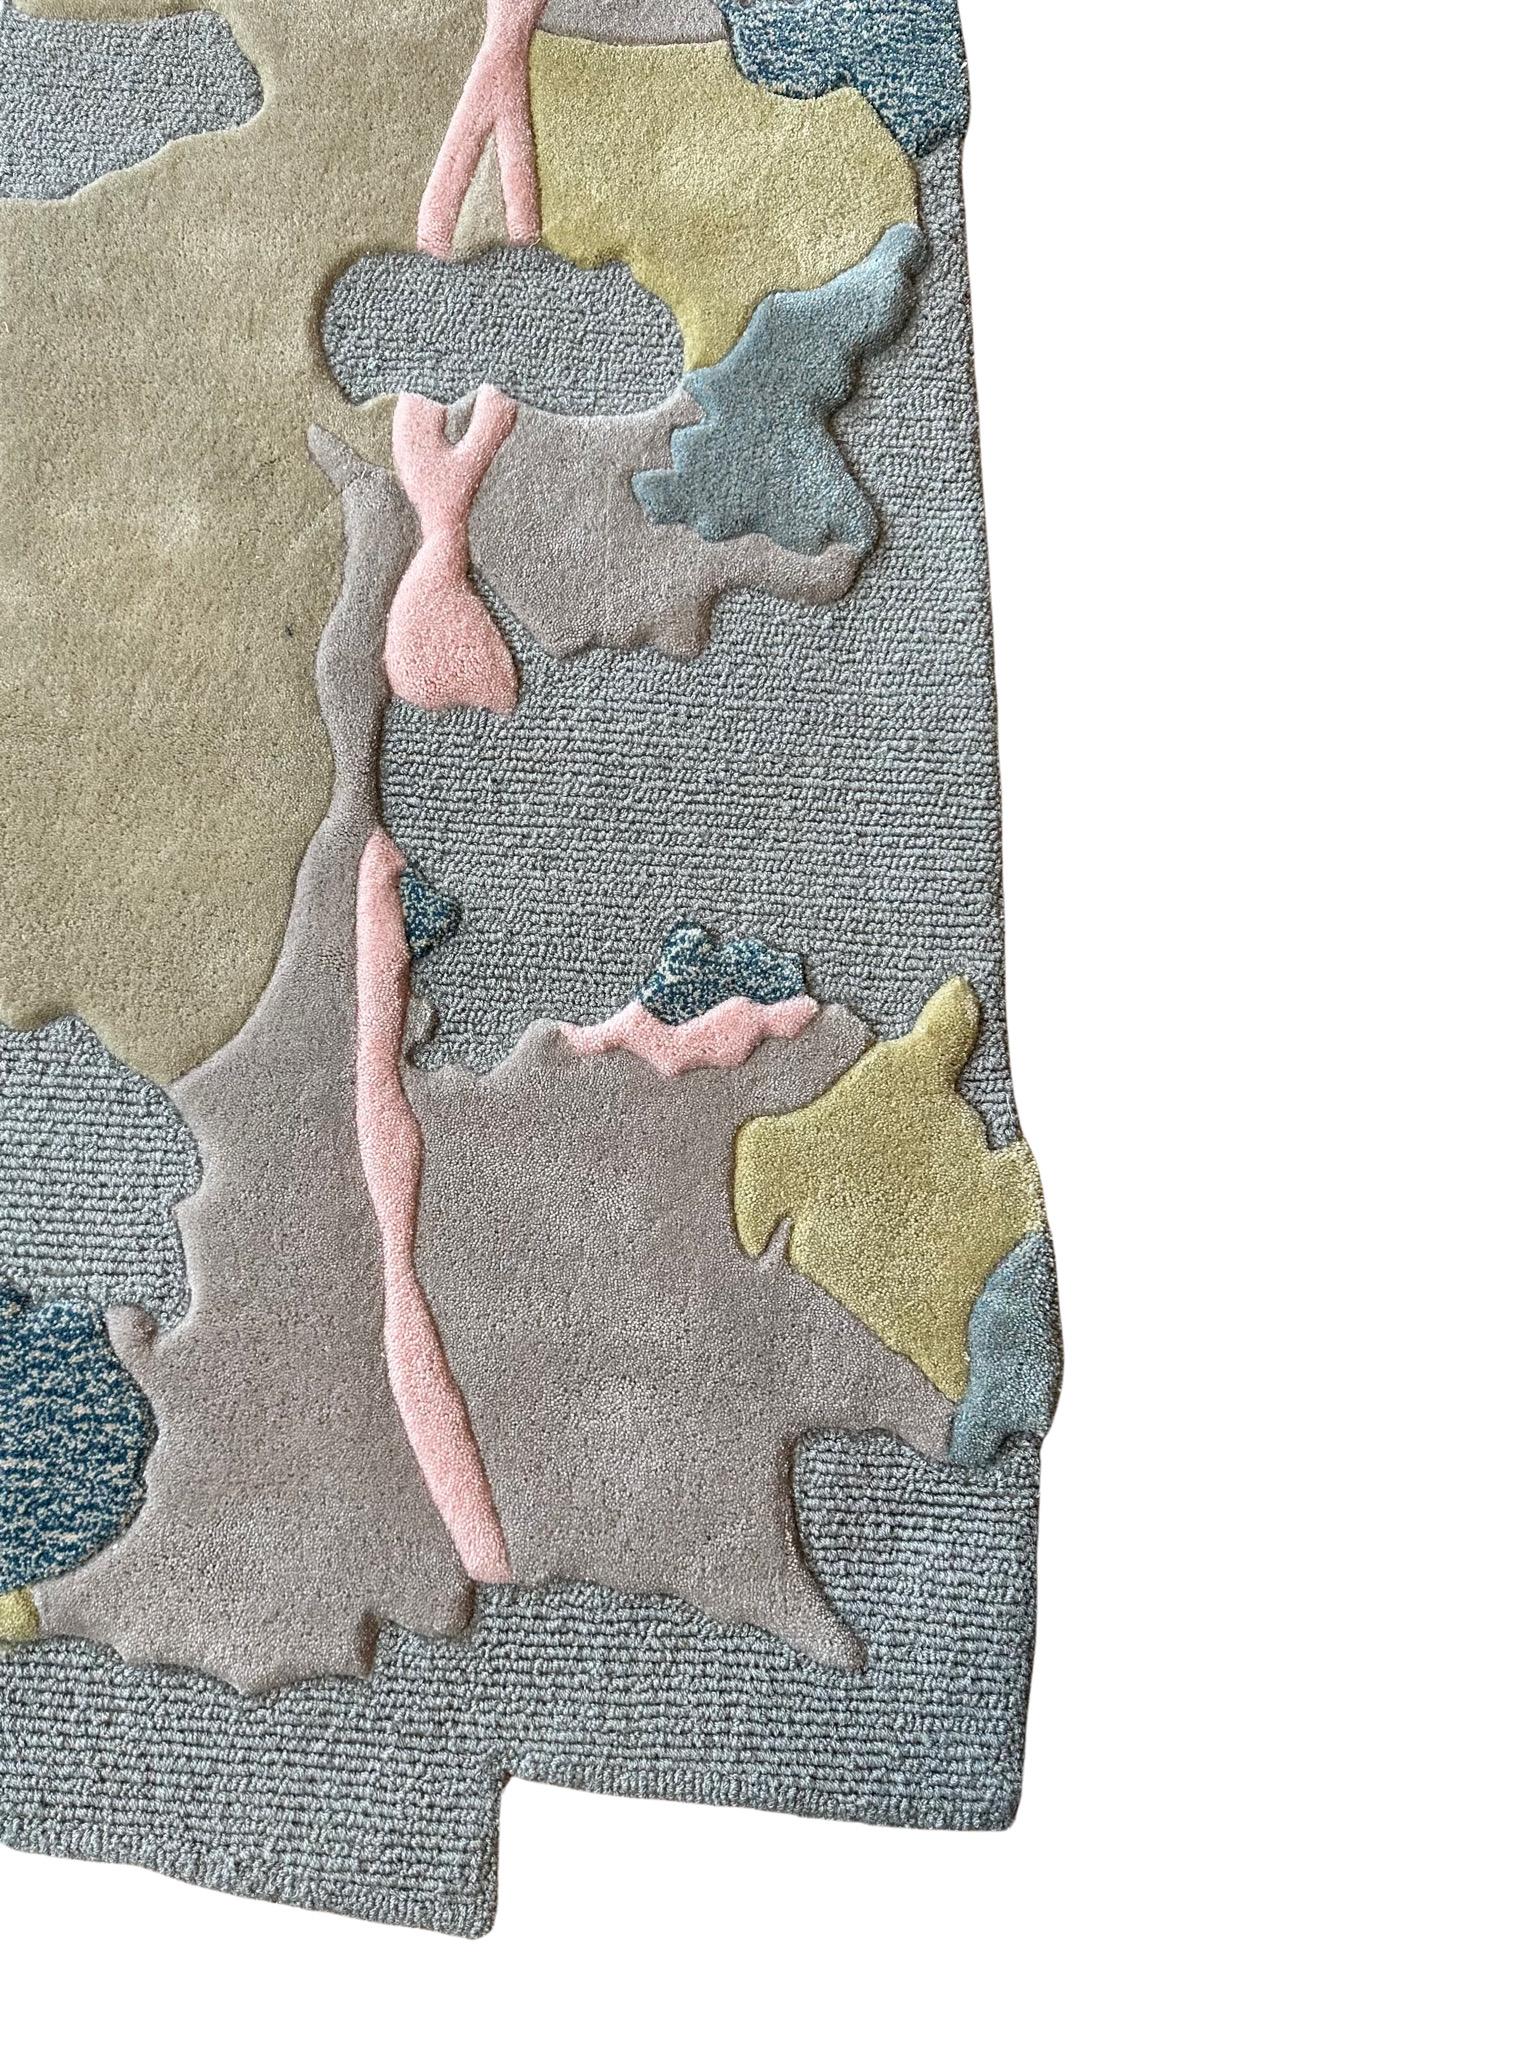 A demure, edged beauty stands ready to spruce your space.

This custom rug of ours displays a palette of muted hues, carefully framed by sharper edges to make a subtle statement.

RAG under this brand, lies a strong picturesque construct with solid